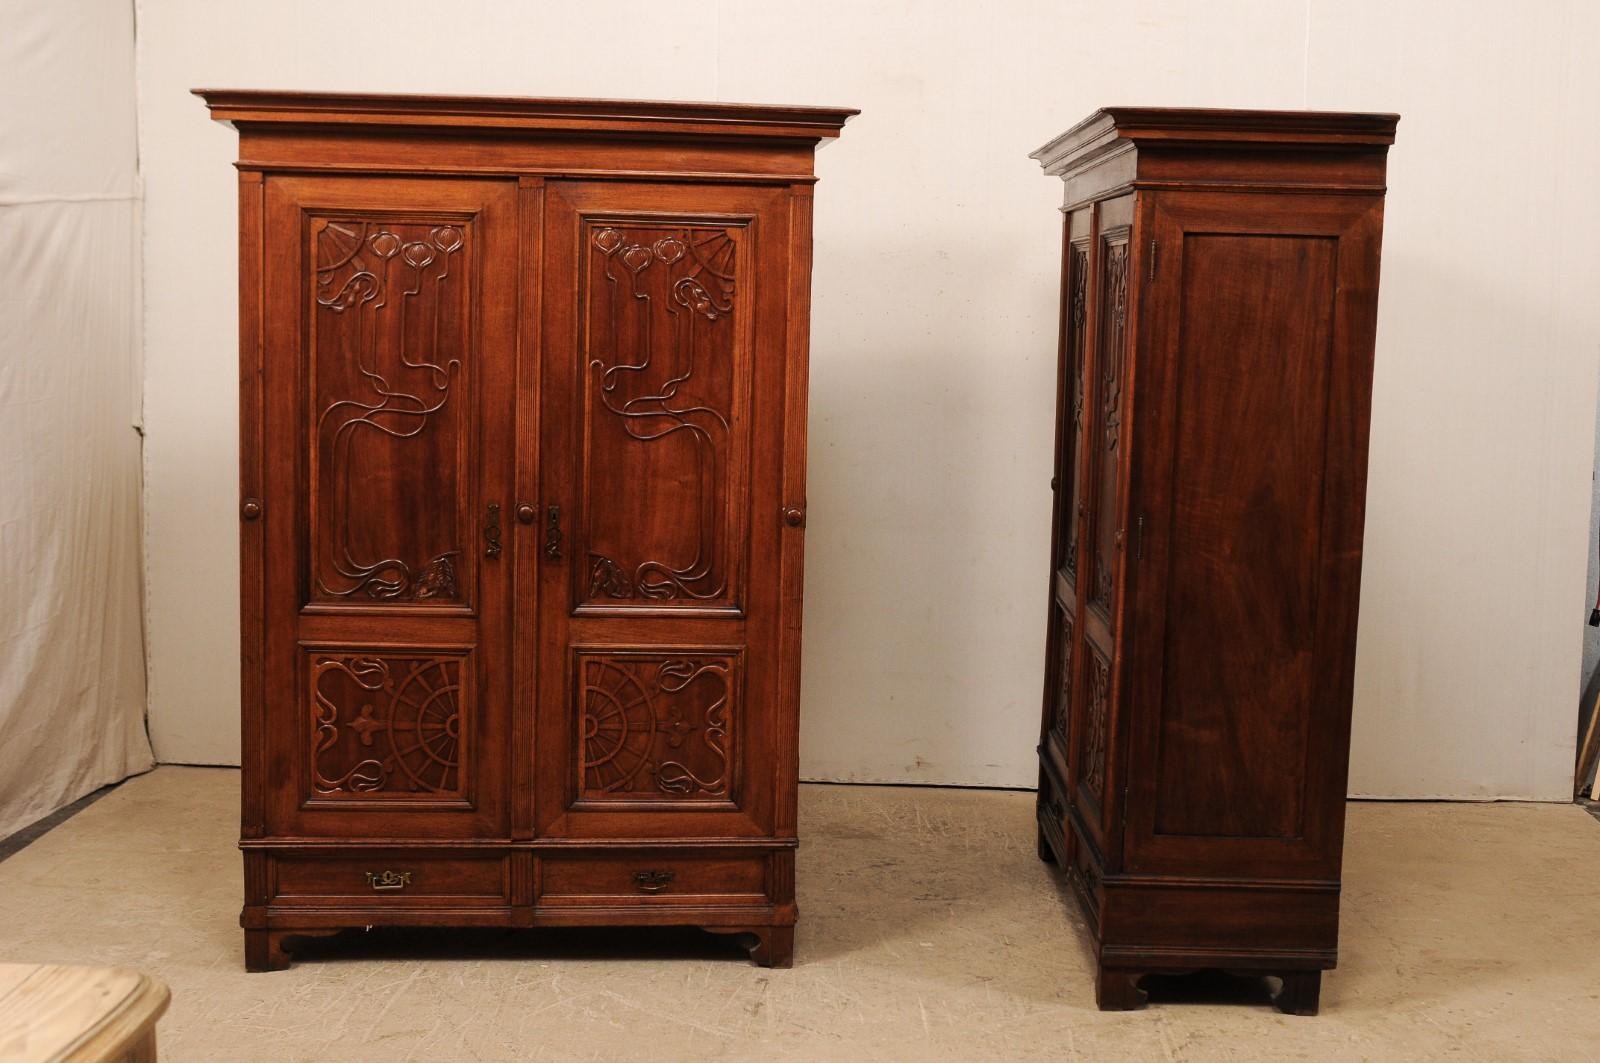 A tall pair of Swedish Art Nouveau wardrobe cabinets with beautifully carved fronts from the early 20th century. This pair of antique armoires from Sweden each feature a pair of exquisitely carved two paneled doors, framed within vertically fluted